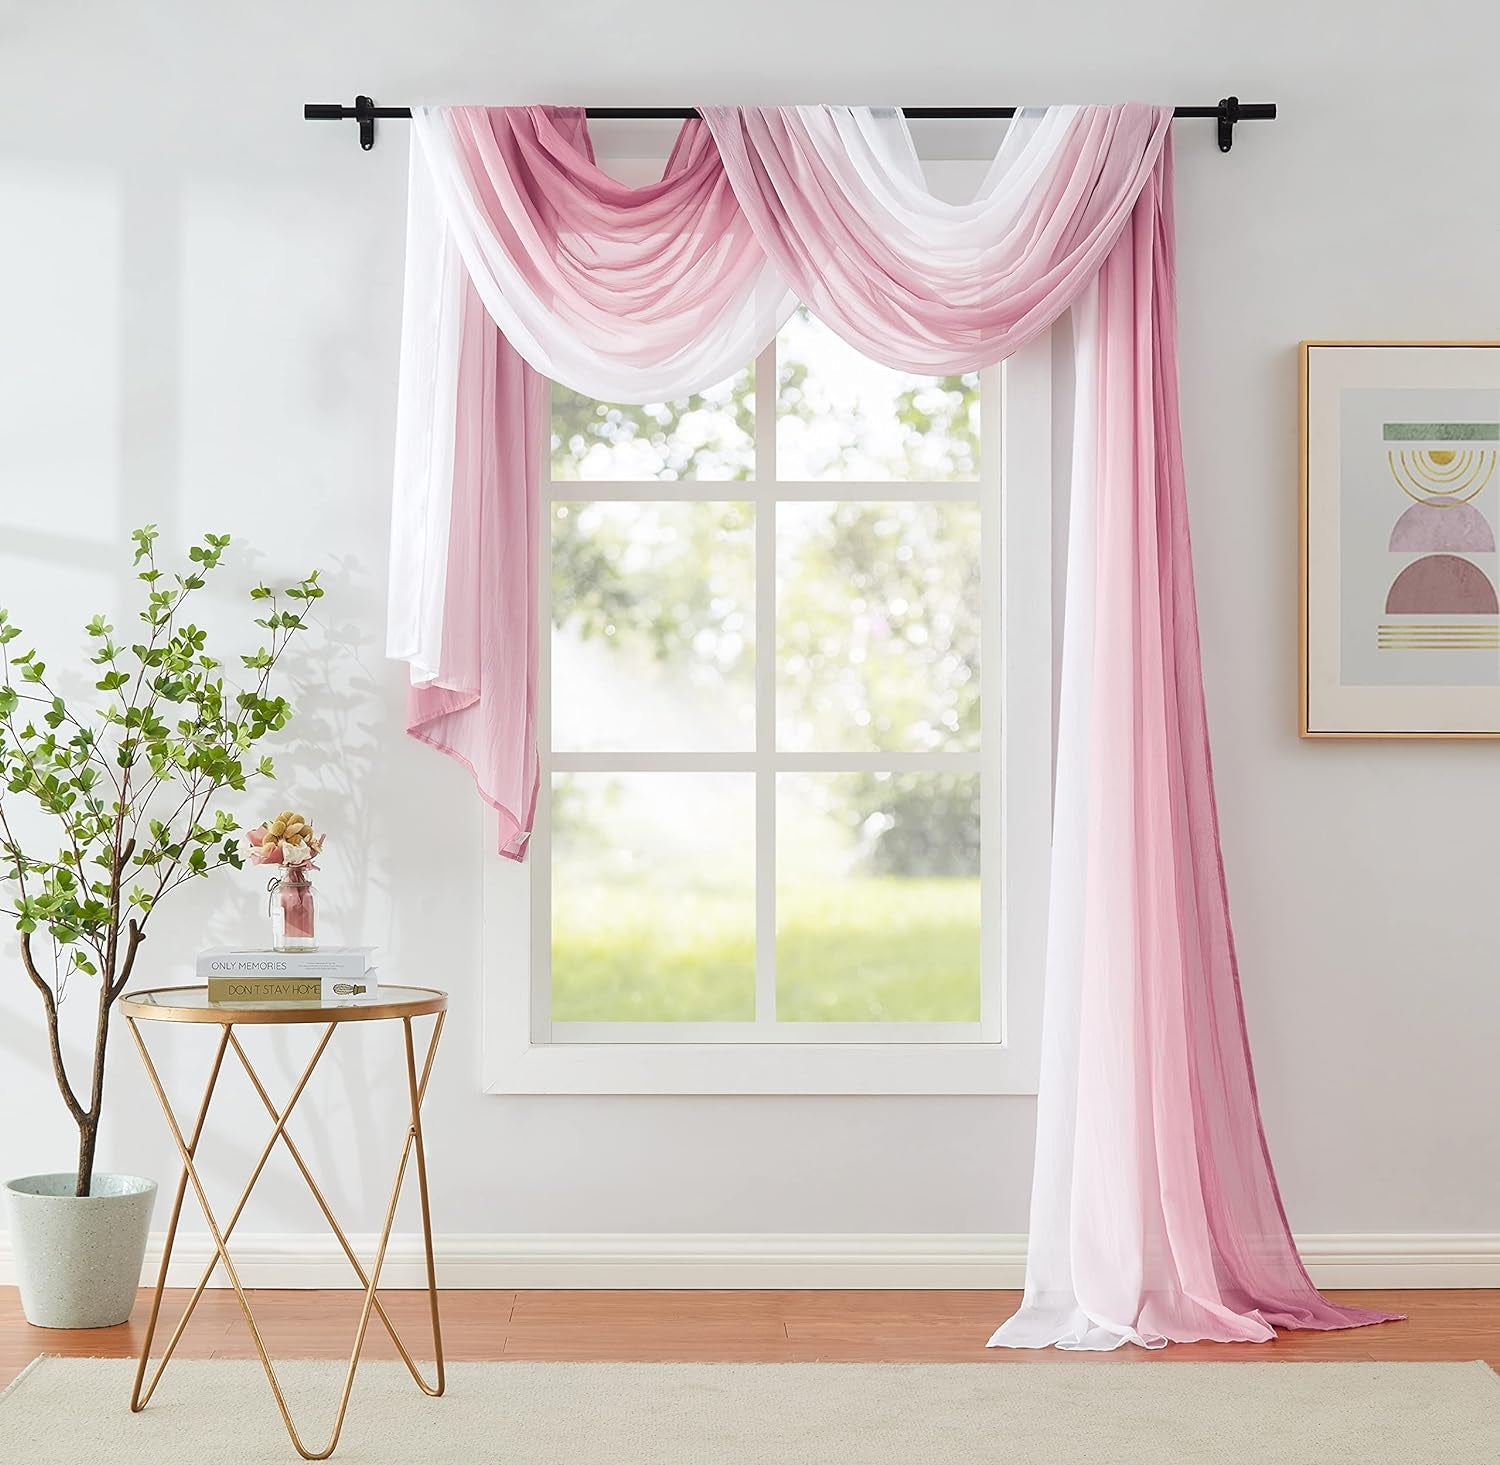 1 Piece Ombre Chiffon Sheer Window Scarf Valance Curtains 18Ft for Living Room, Home Decor, 52"X216" Long Crinkle Soft Window Top Sheer Voile Valance for Wedding Party Decor, Grey